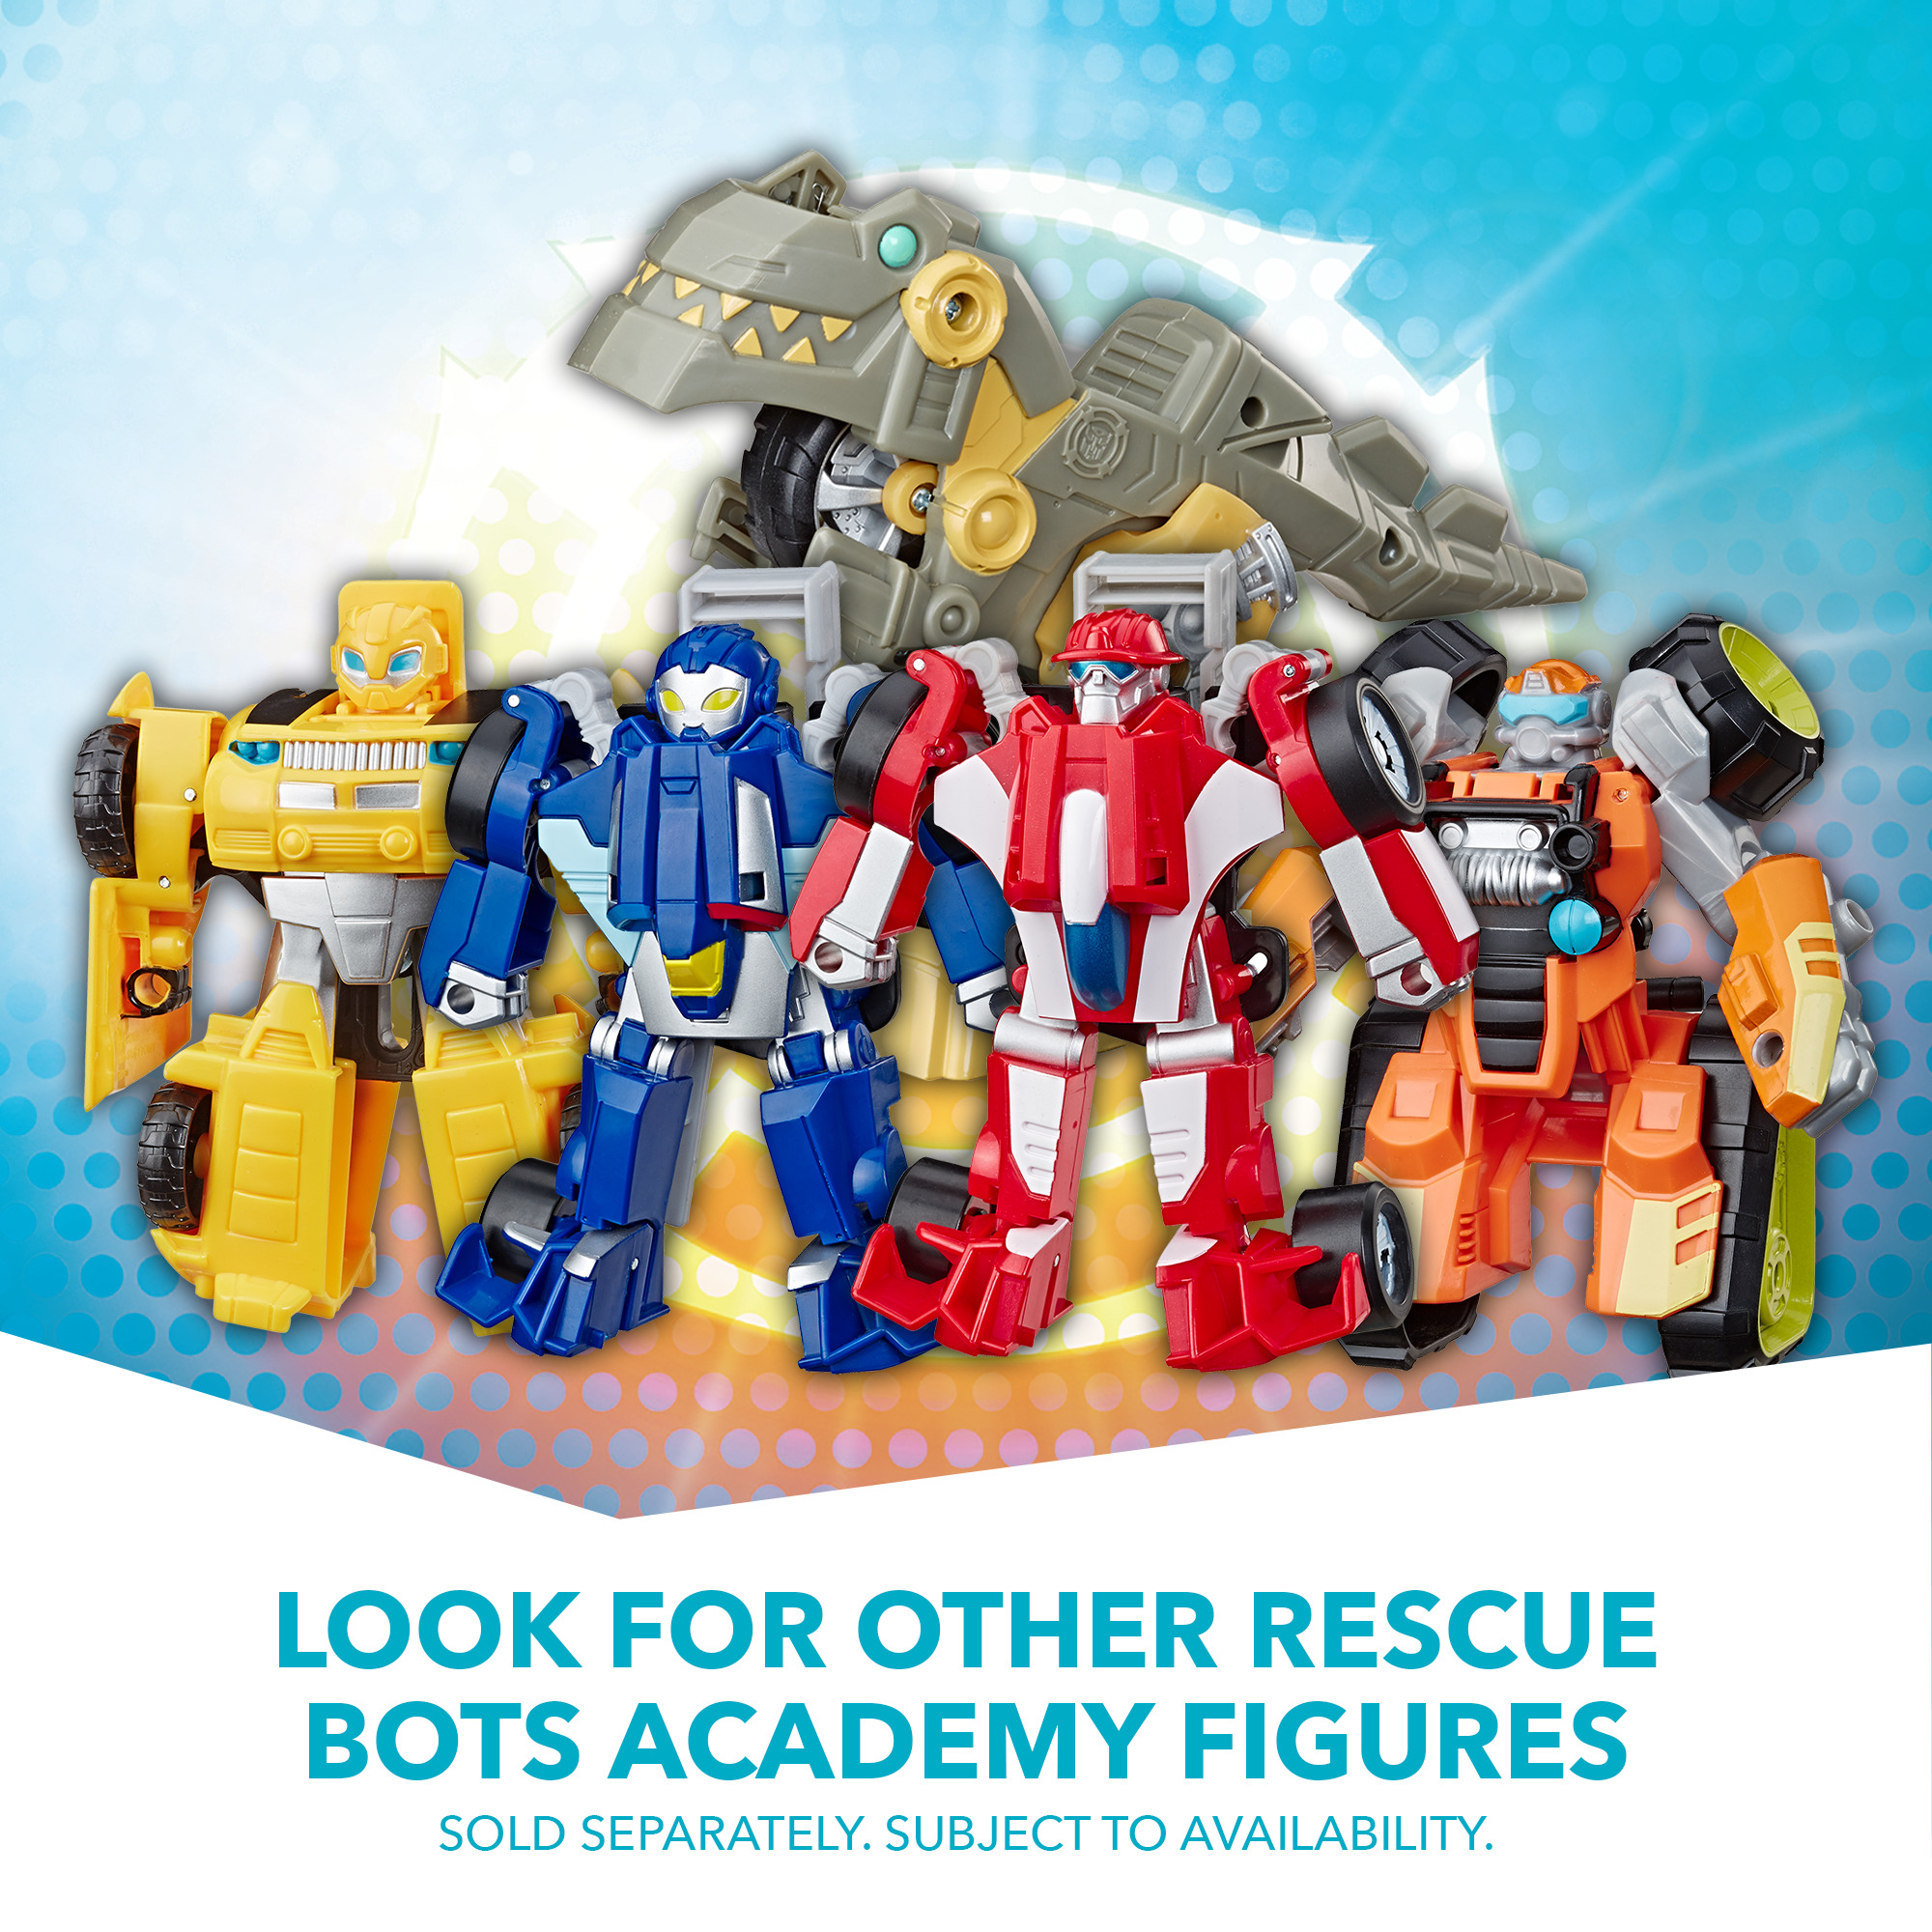 Playskool Transformers Rescue Bots Academy Wedge the Construction-Bot Action Figure - image 3 of 8